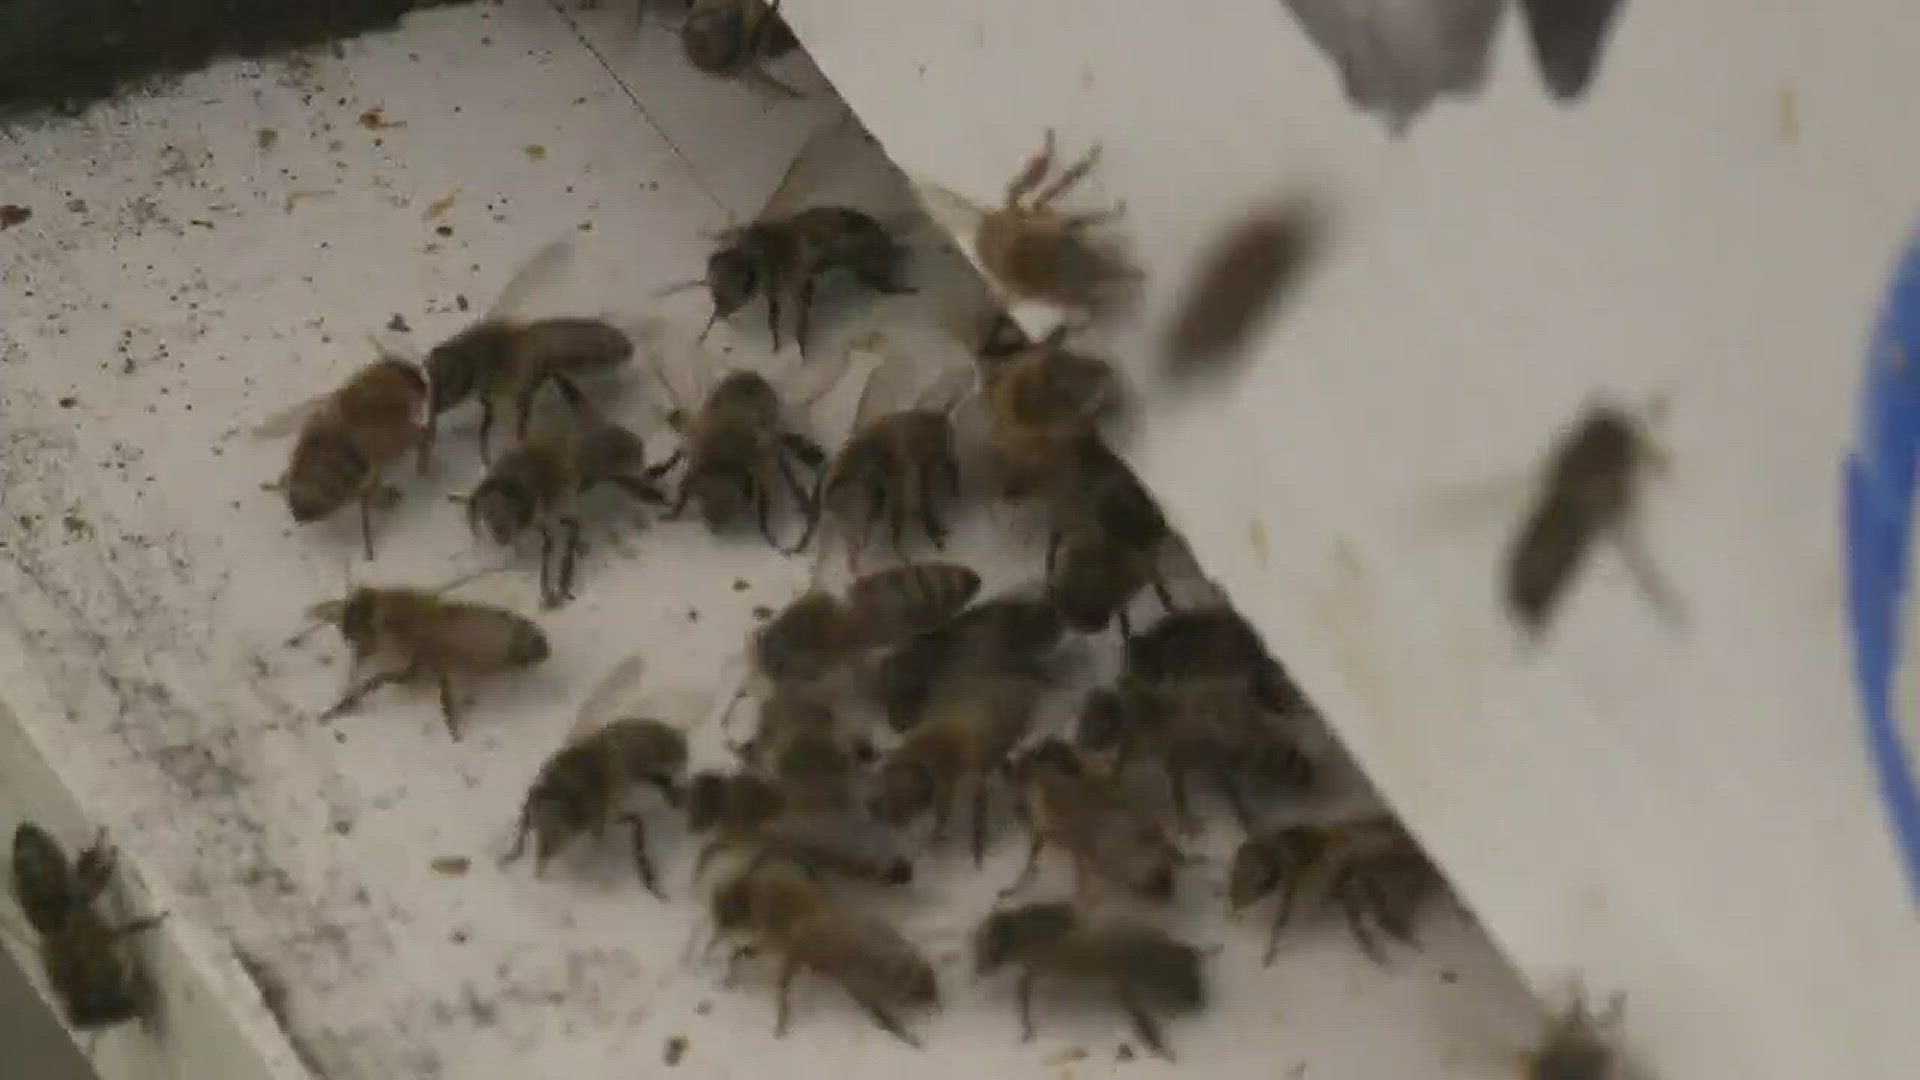 There's more bad news about the decreasing bee population.